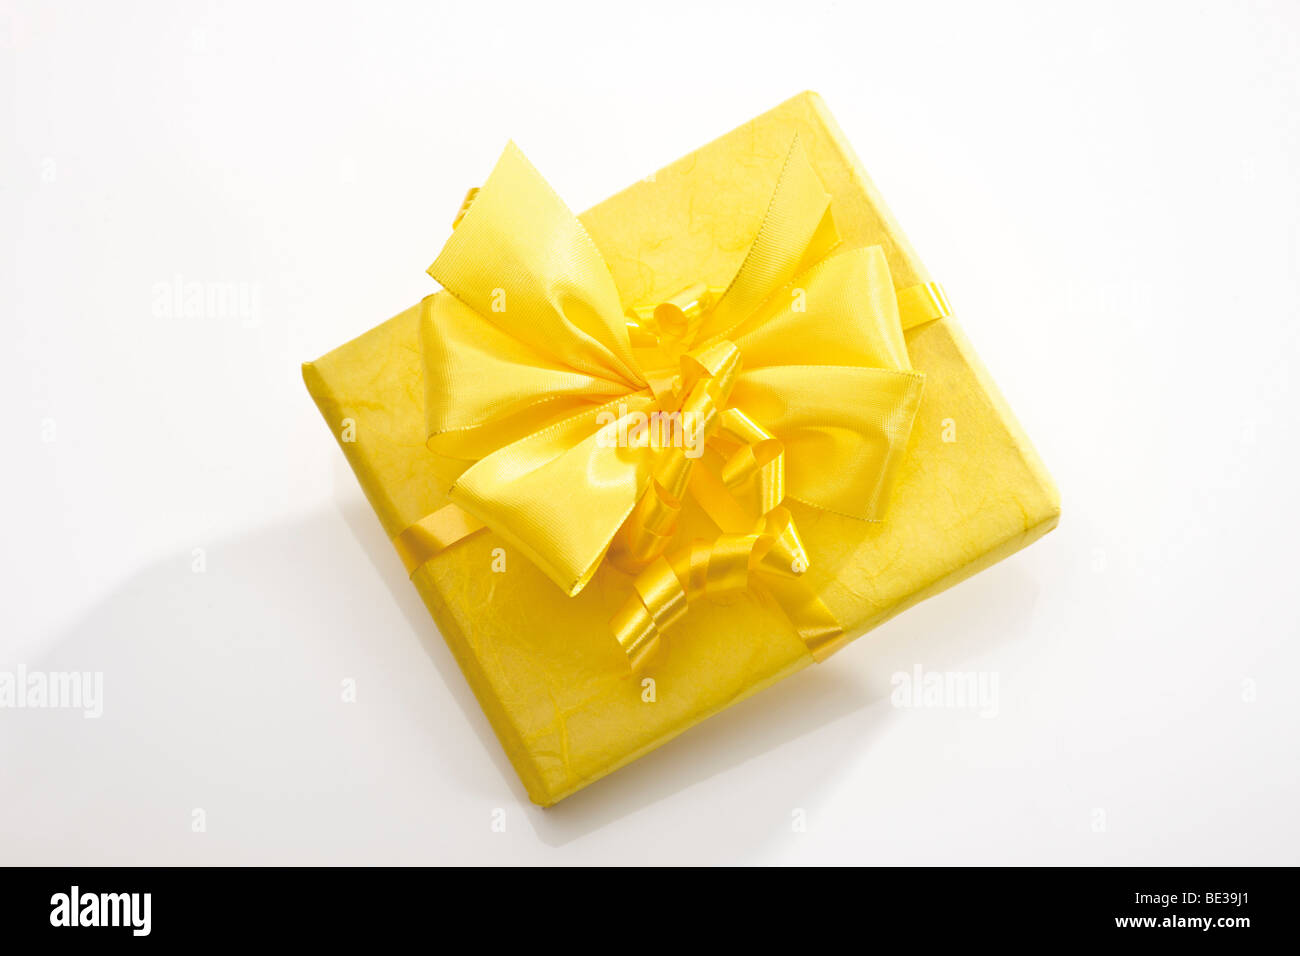 Gift box with a yellow ribbon Stock Photo